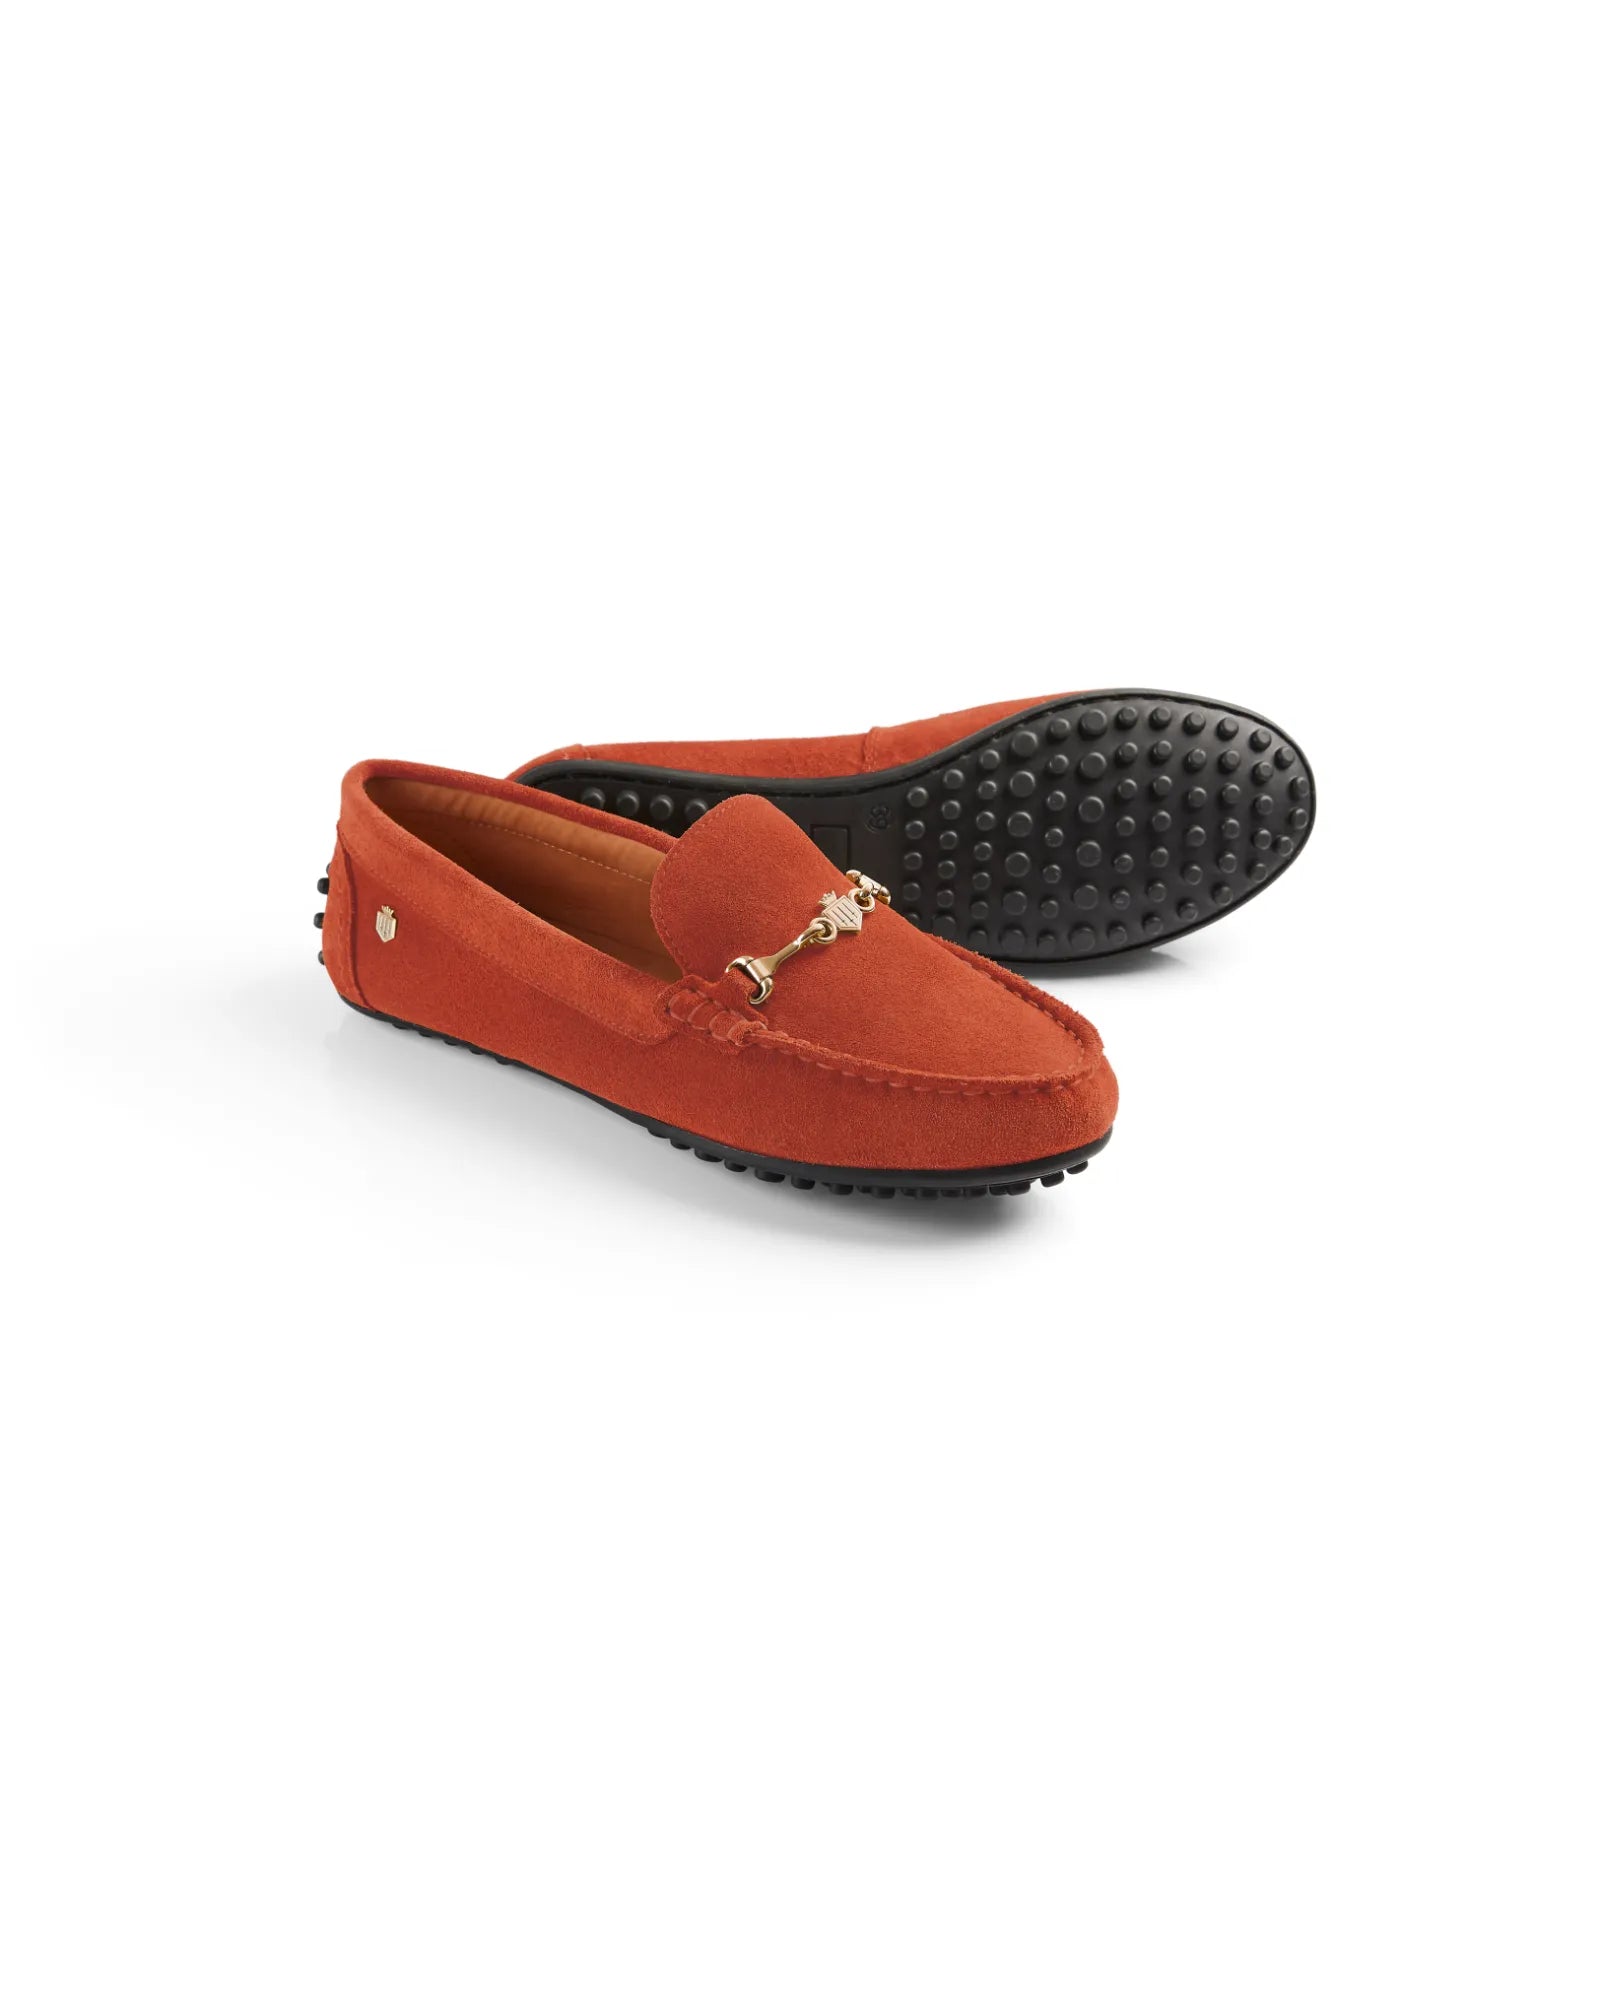 The Trinity Driving Shoe - Sunset Orange Suede